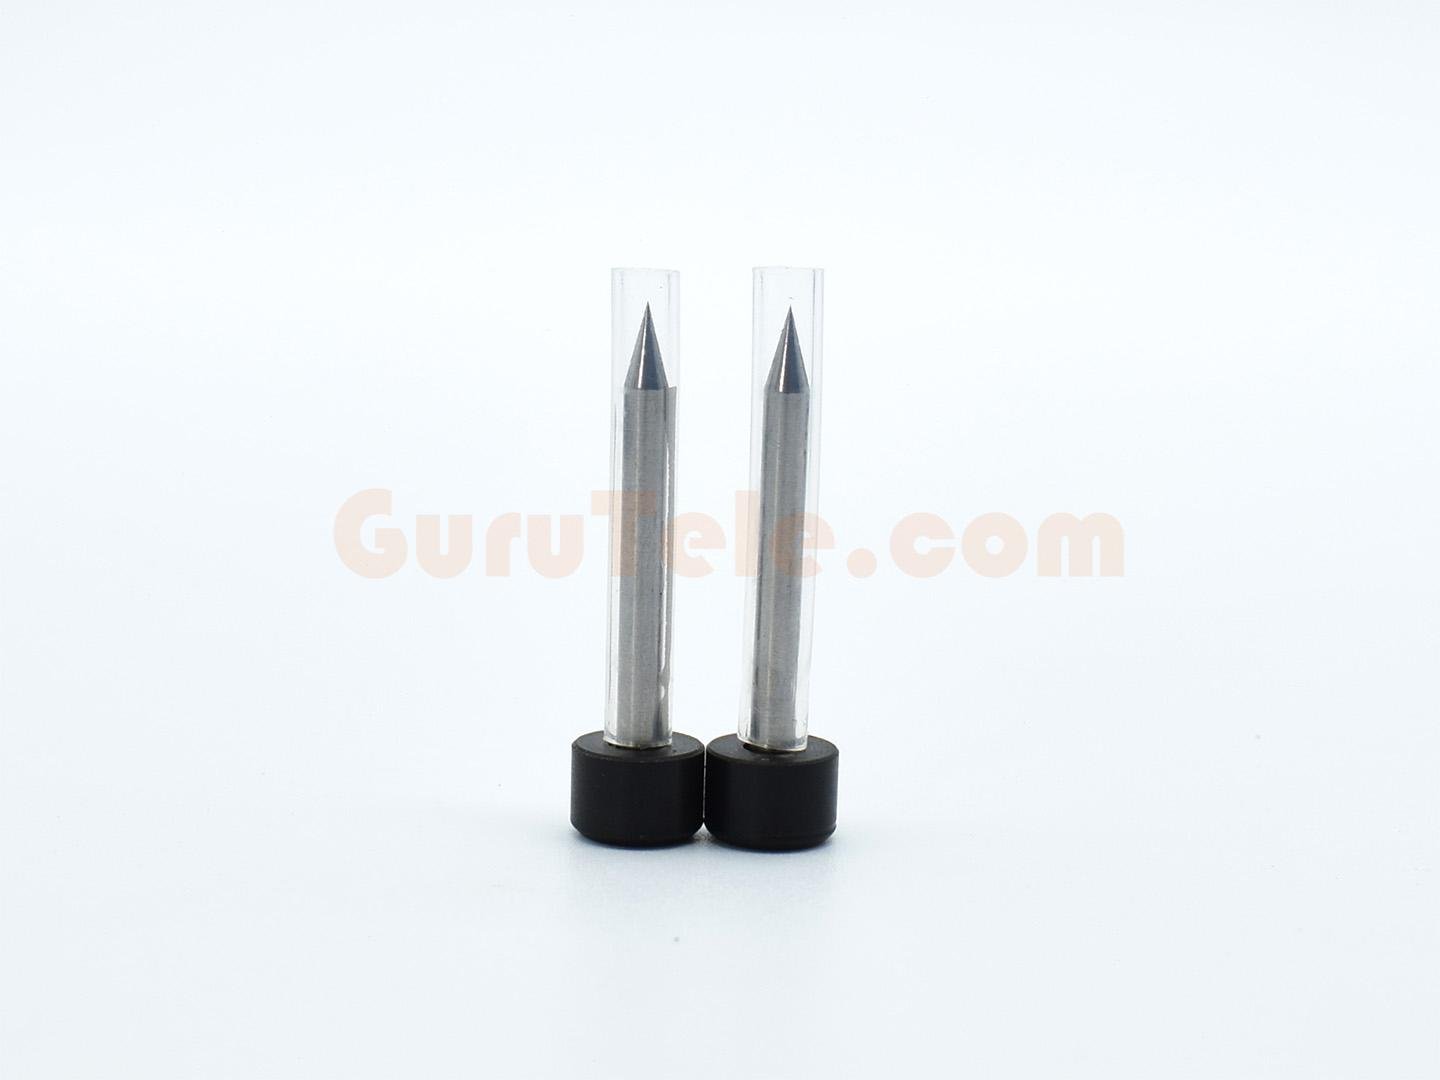 1 pair Fiber Electrode for INNO IFS-15 IFS-15H IFS-10 view3/5/7 Fusion Splicer